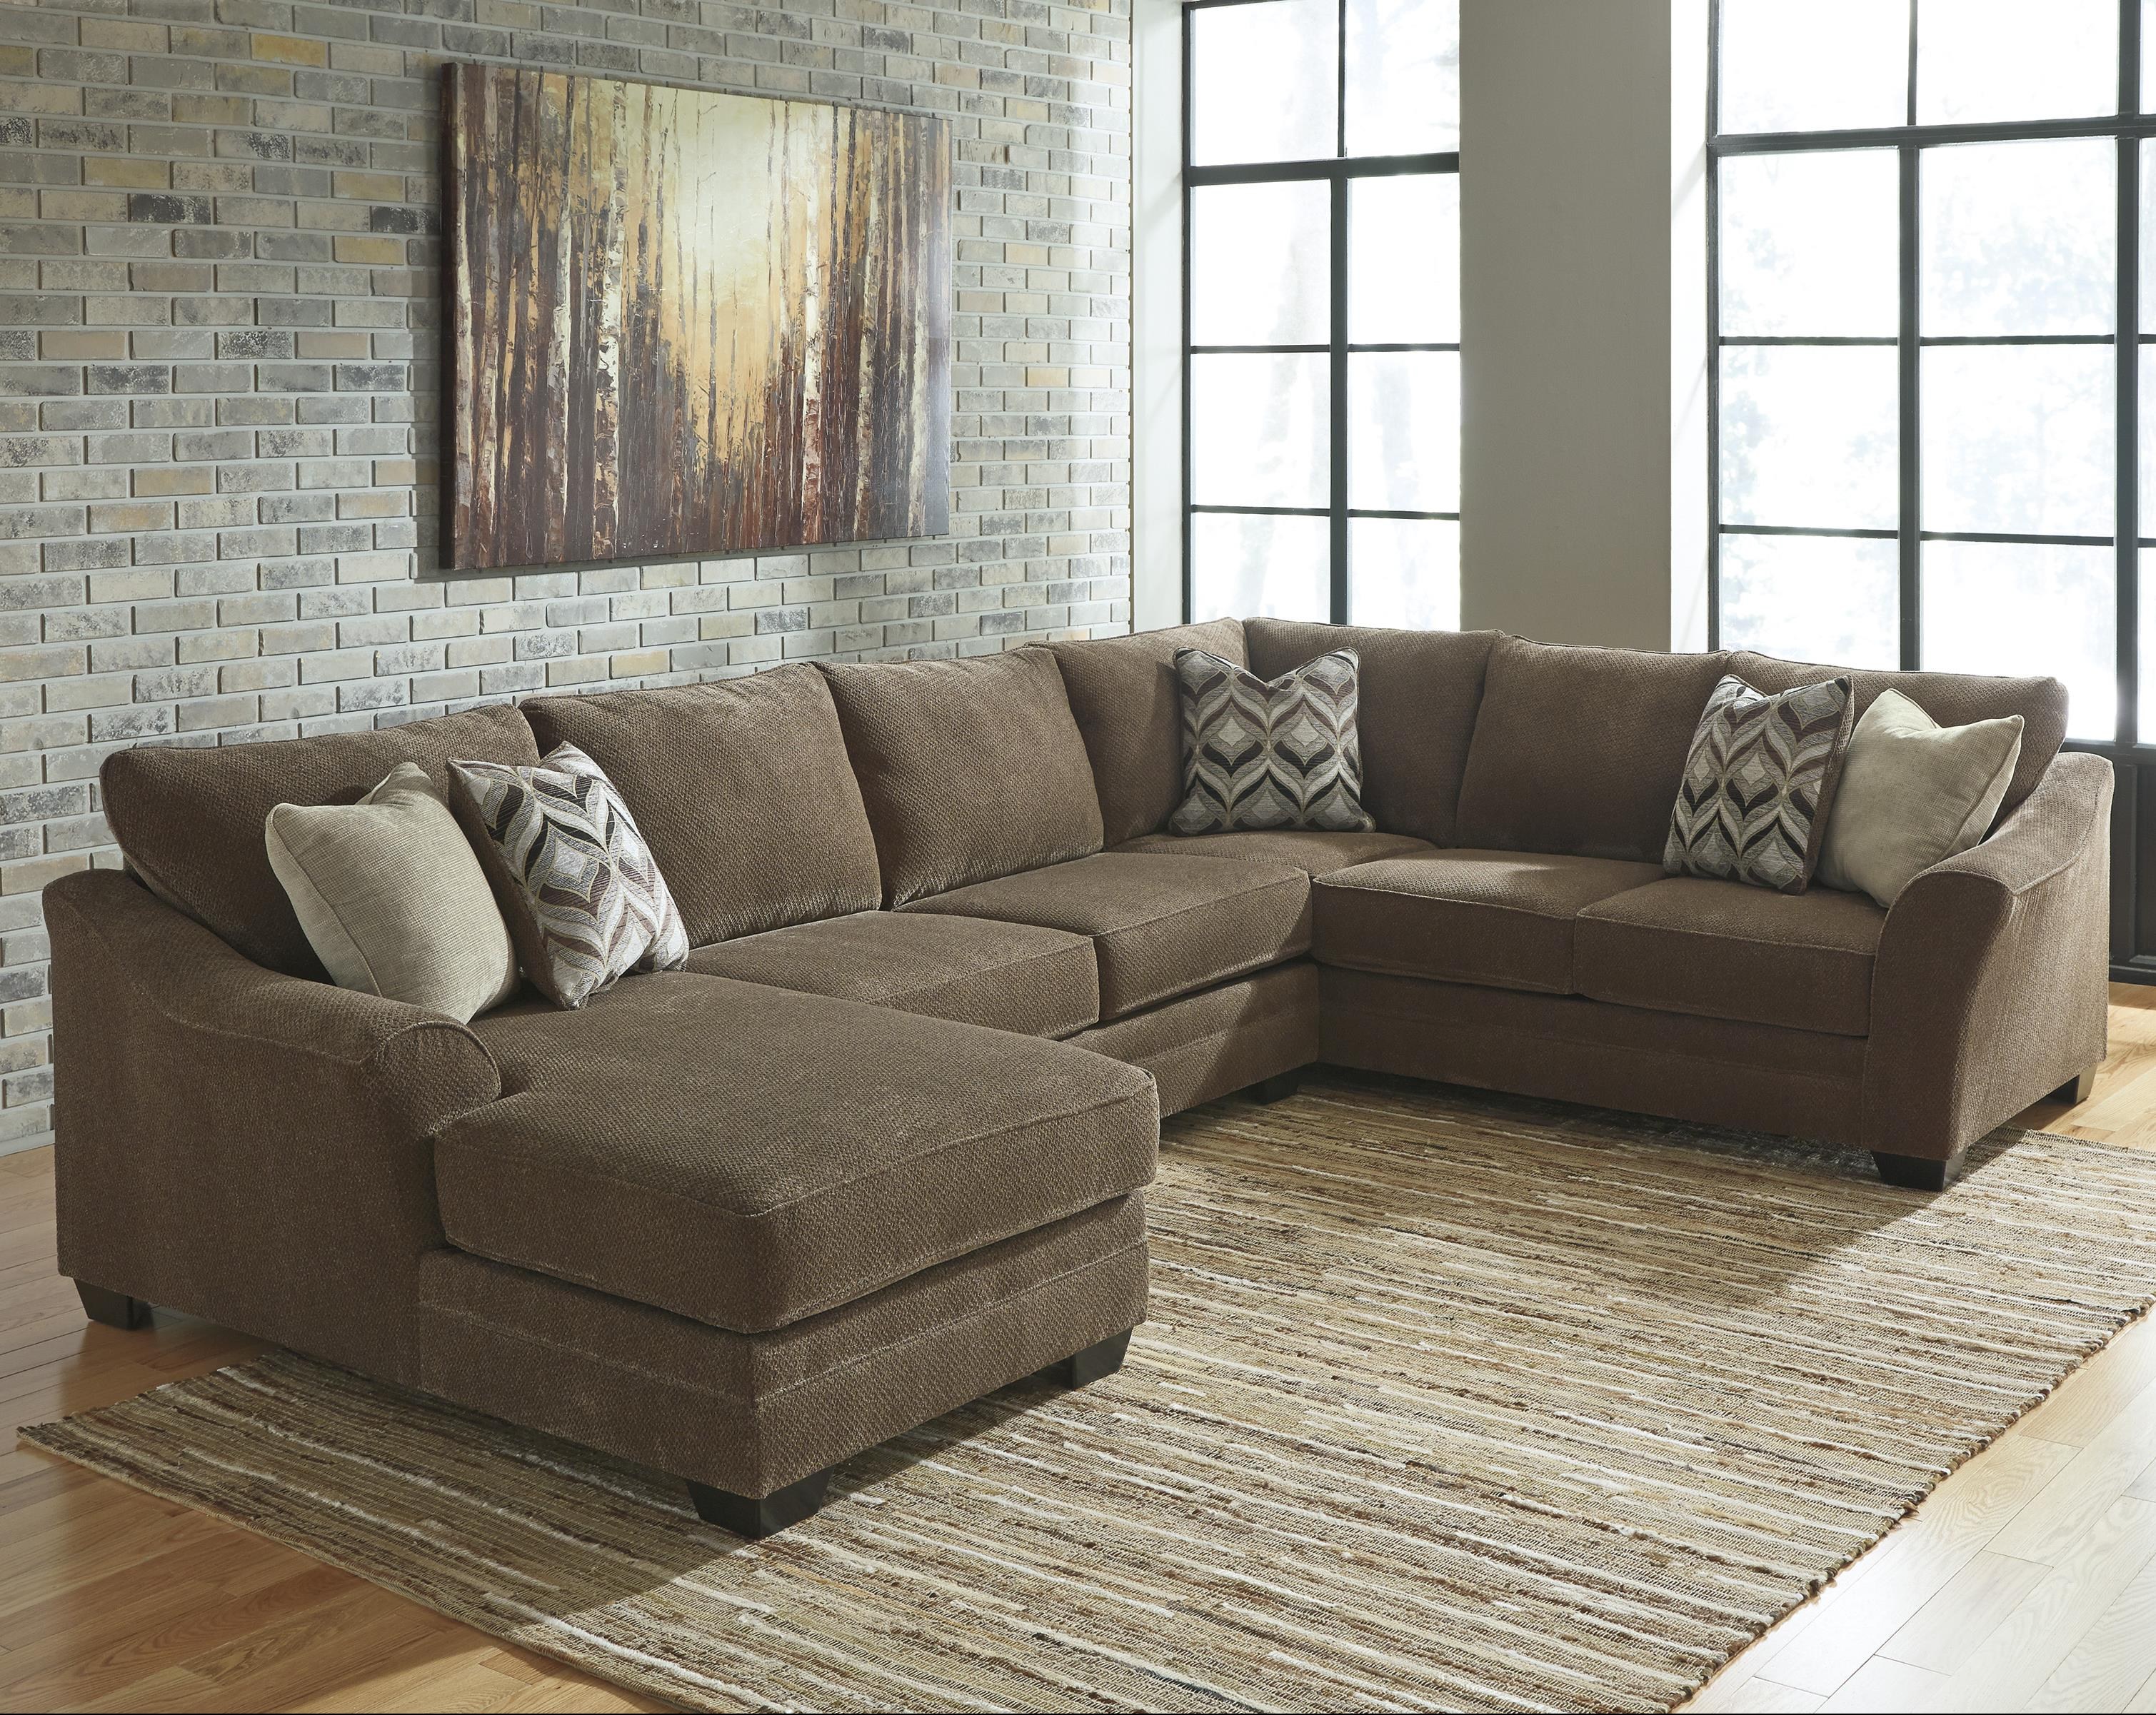 3 piece sectional sofa benchcraft justyna contemporary 3-piece sectional with left chaise JDBRVKA